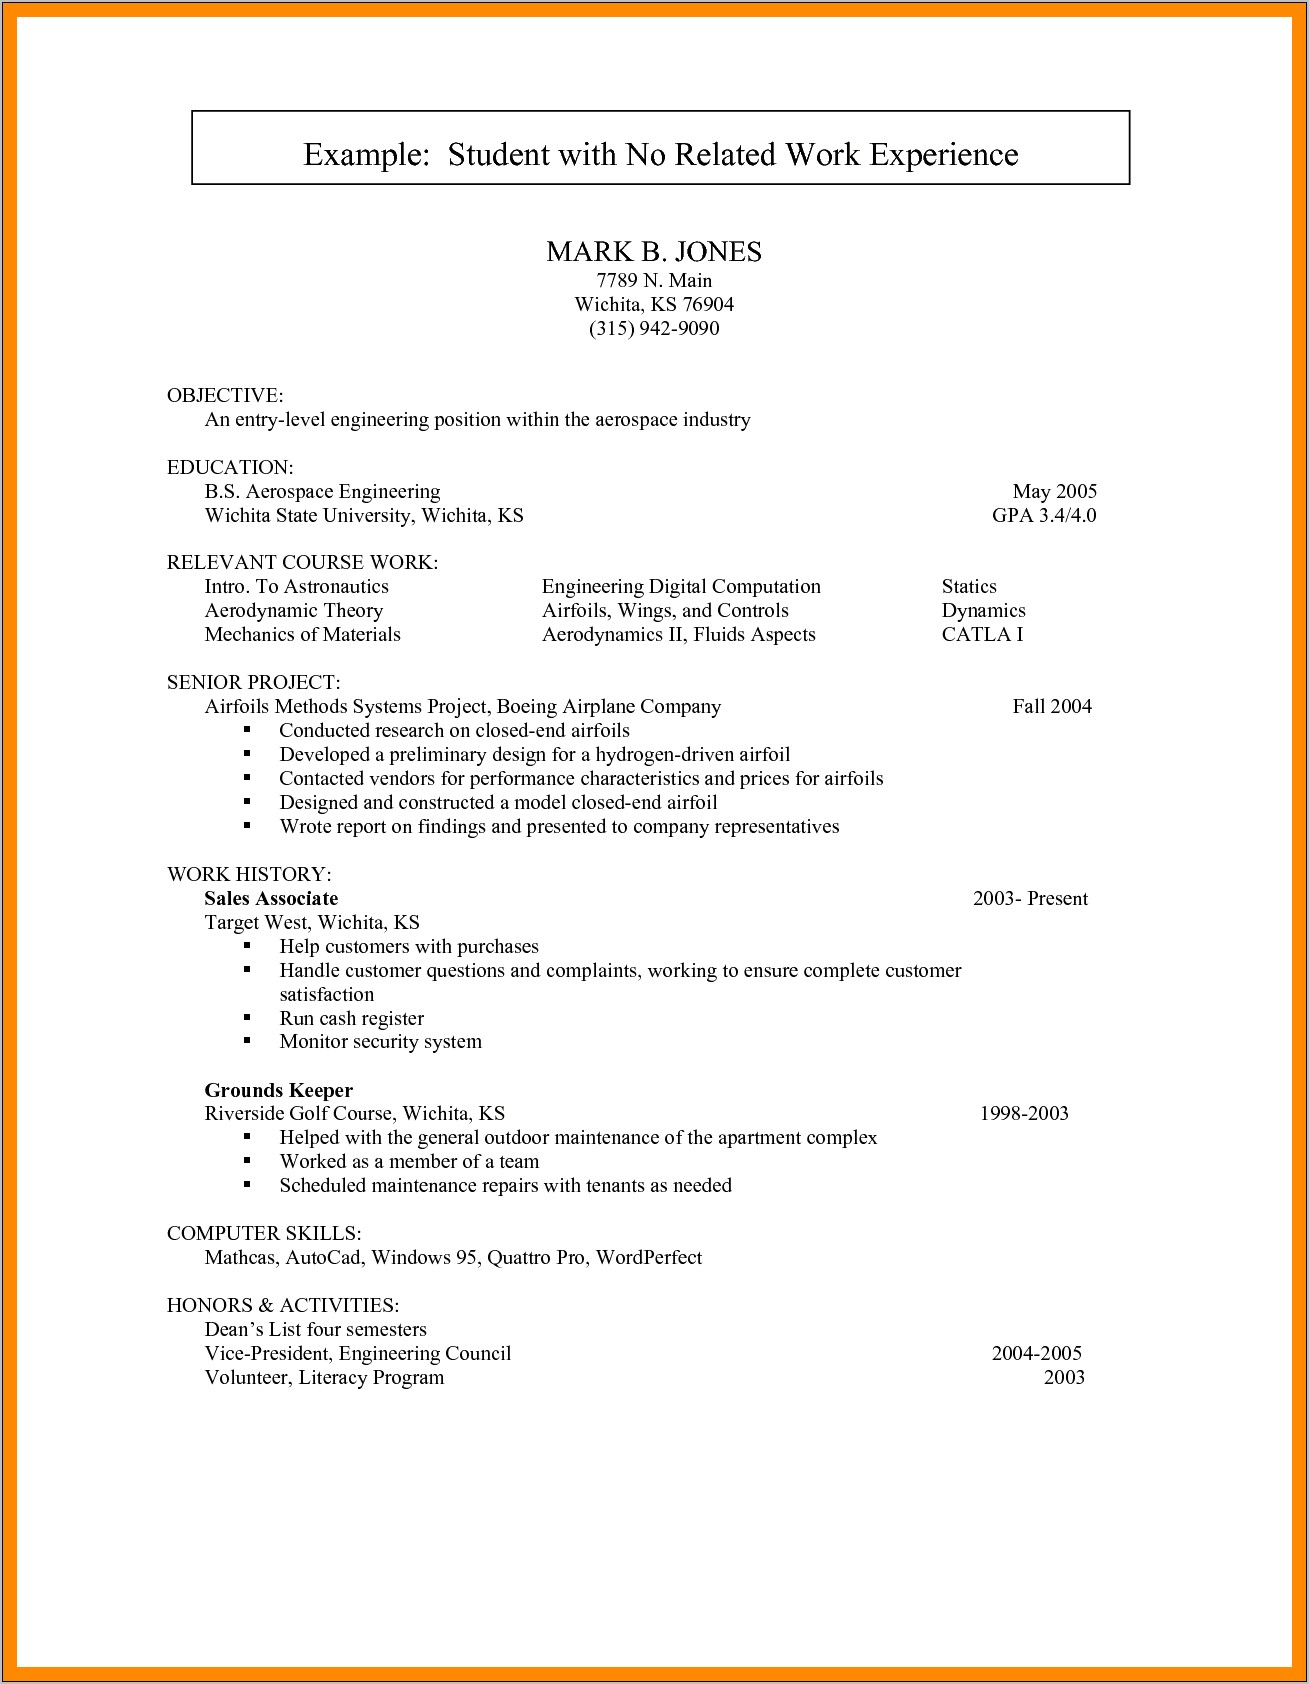 Resume For Undergraduate Student With Experience